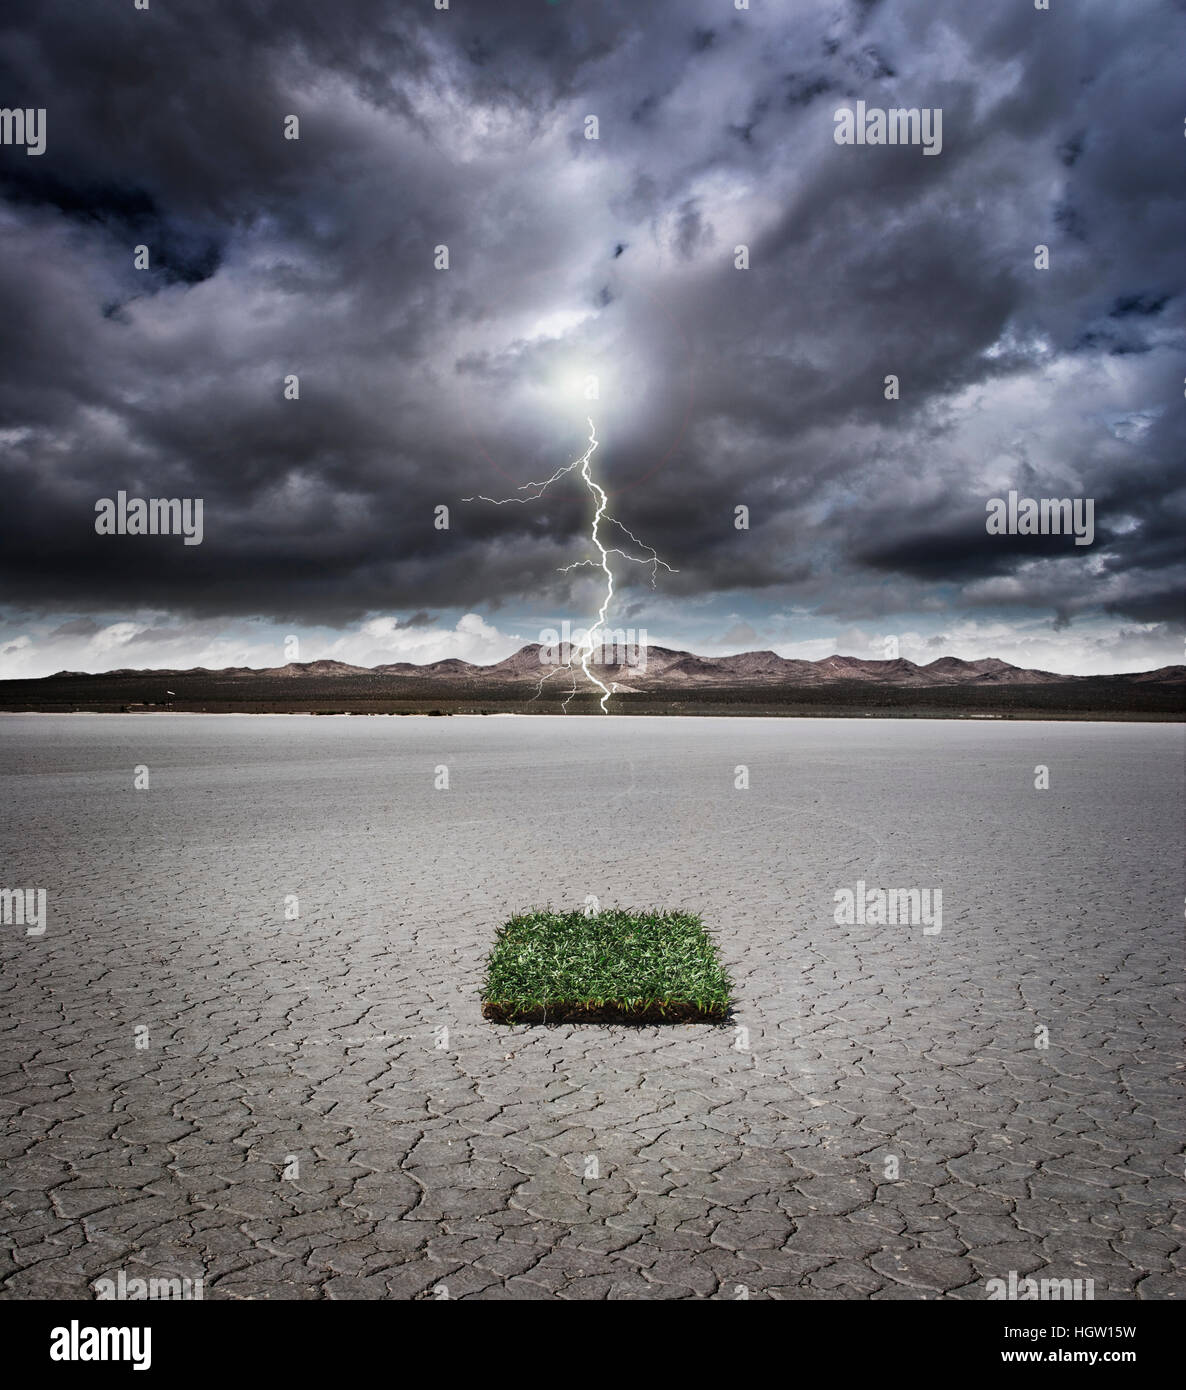 Patch Of Grass In A Dry Lake Bed With Storm Clouds And Lightning Stock Photo